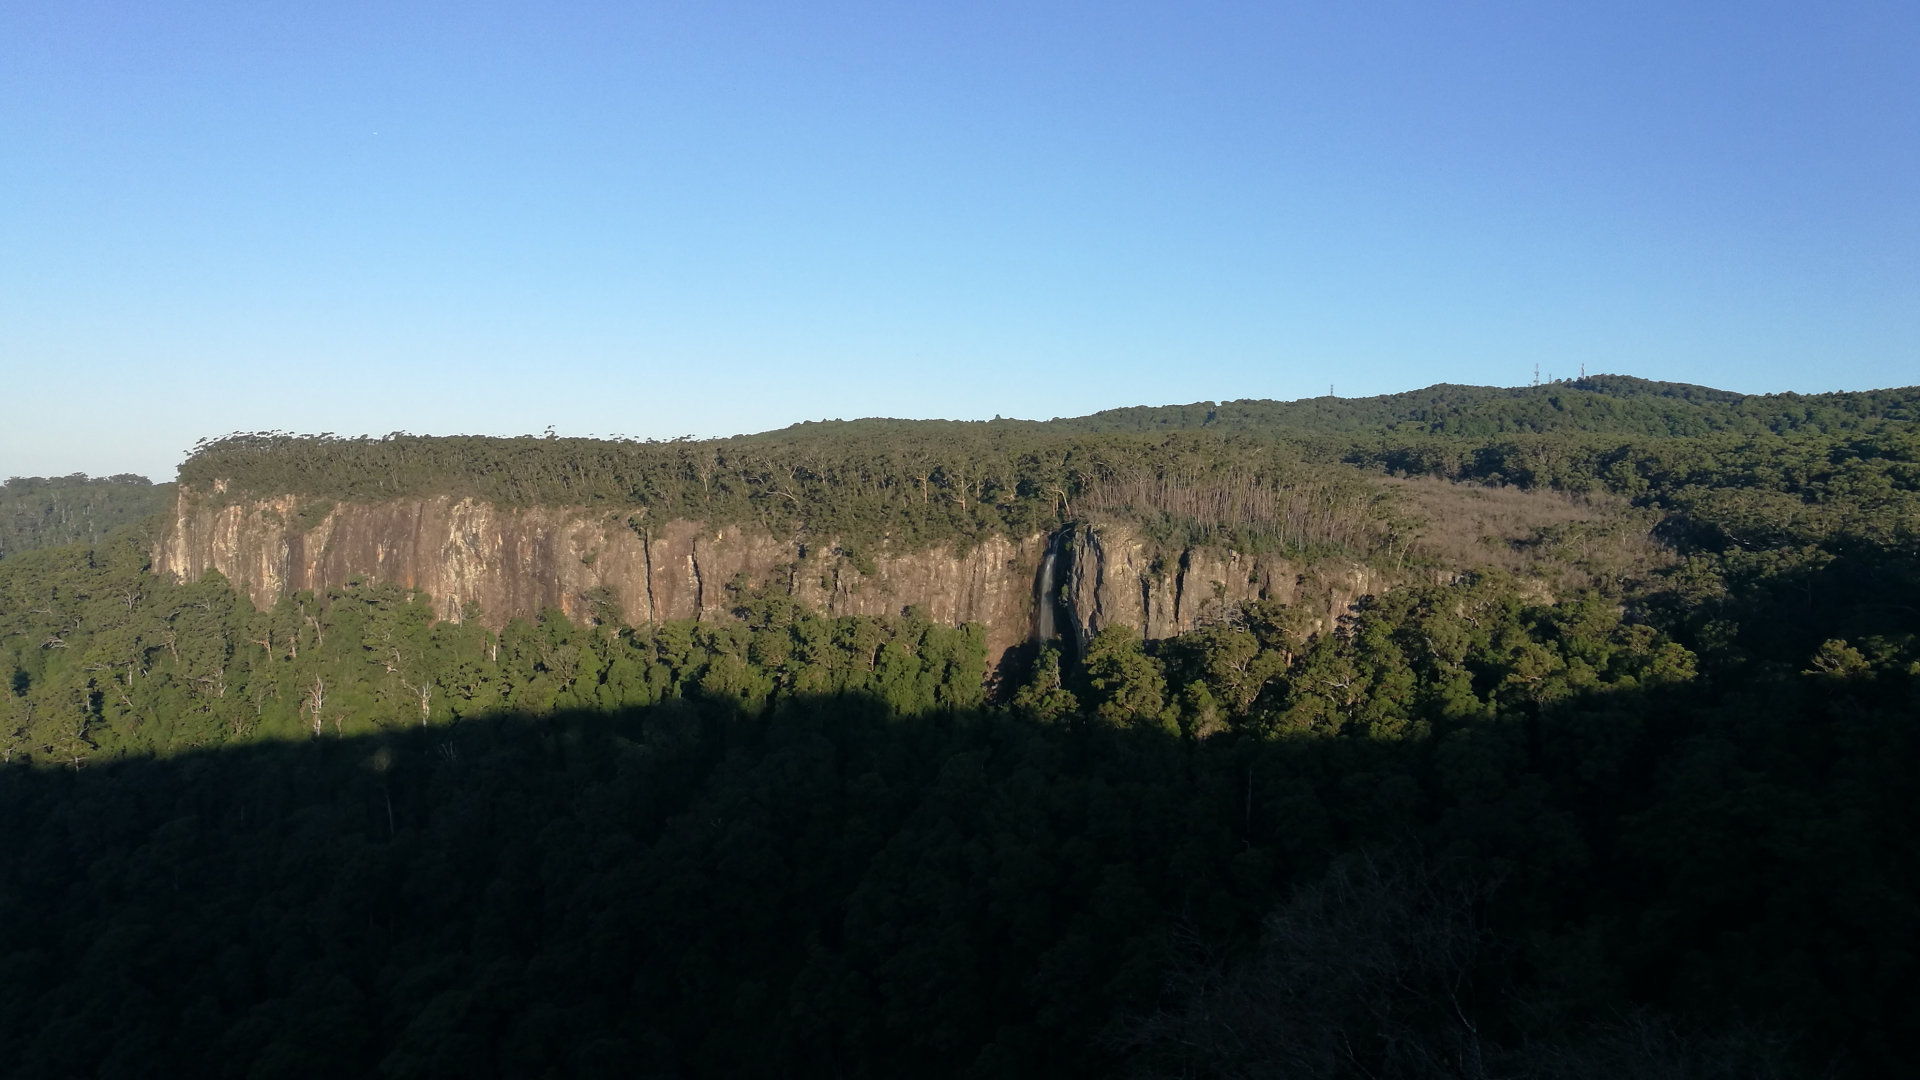 View of the rock wall across Canyon Lookout, located in Springbrook with views across the canyon, and down the valley through to the Gold Coast in the distance